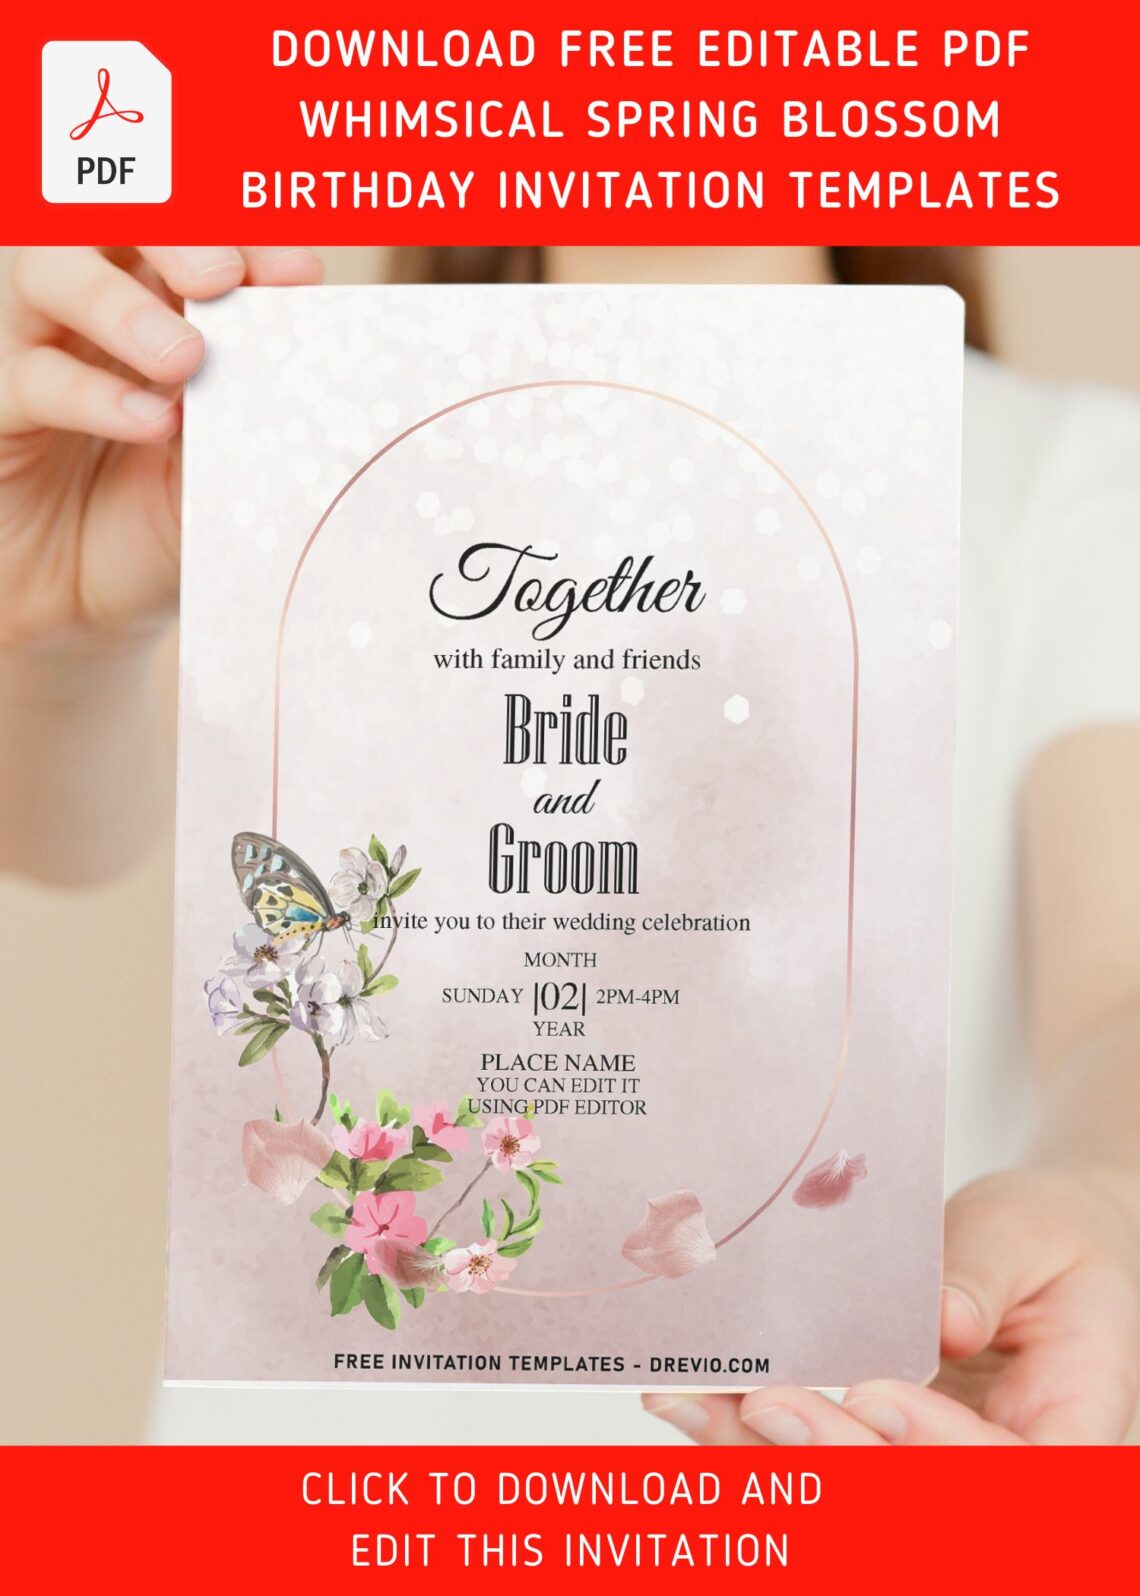 (Free Editable PDF) Whimsical Spring Blossom Wedding Invitation Templates with white garden roses